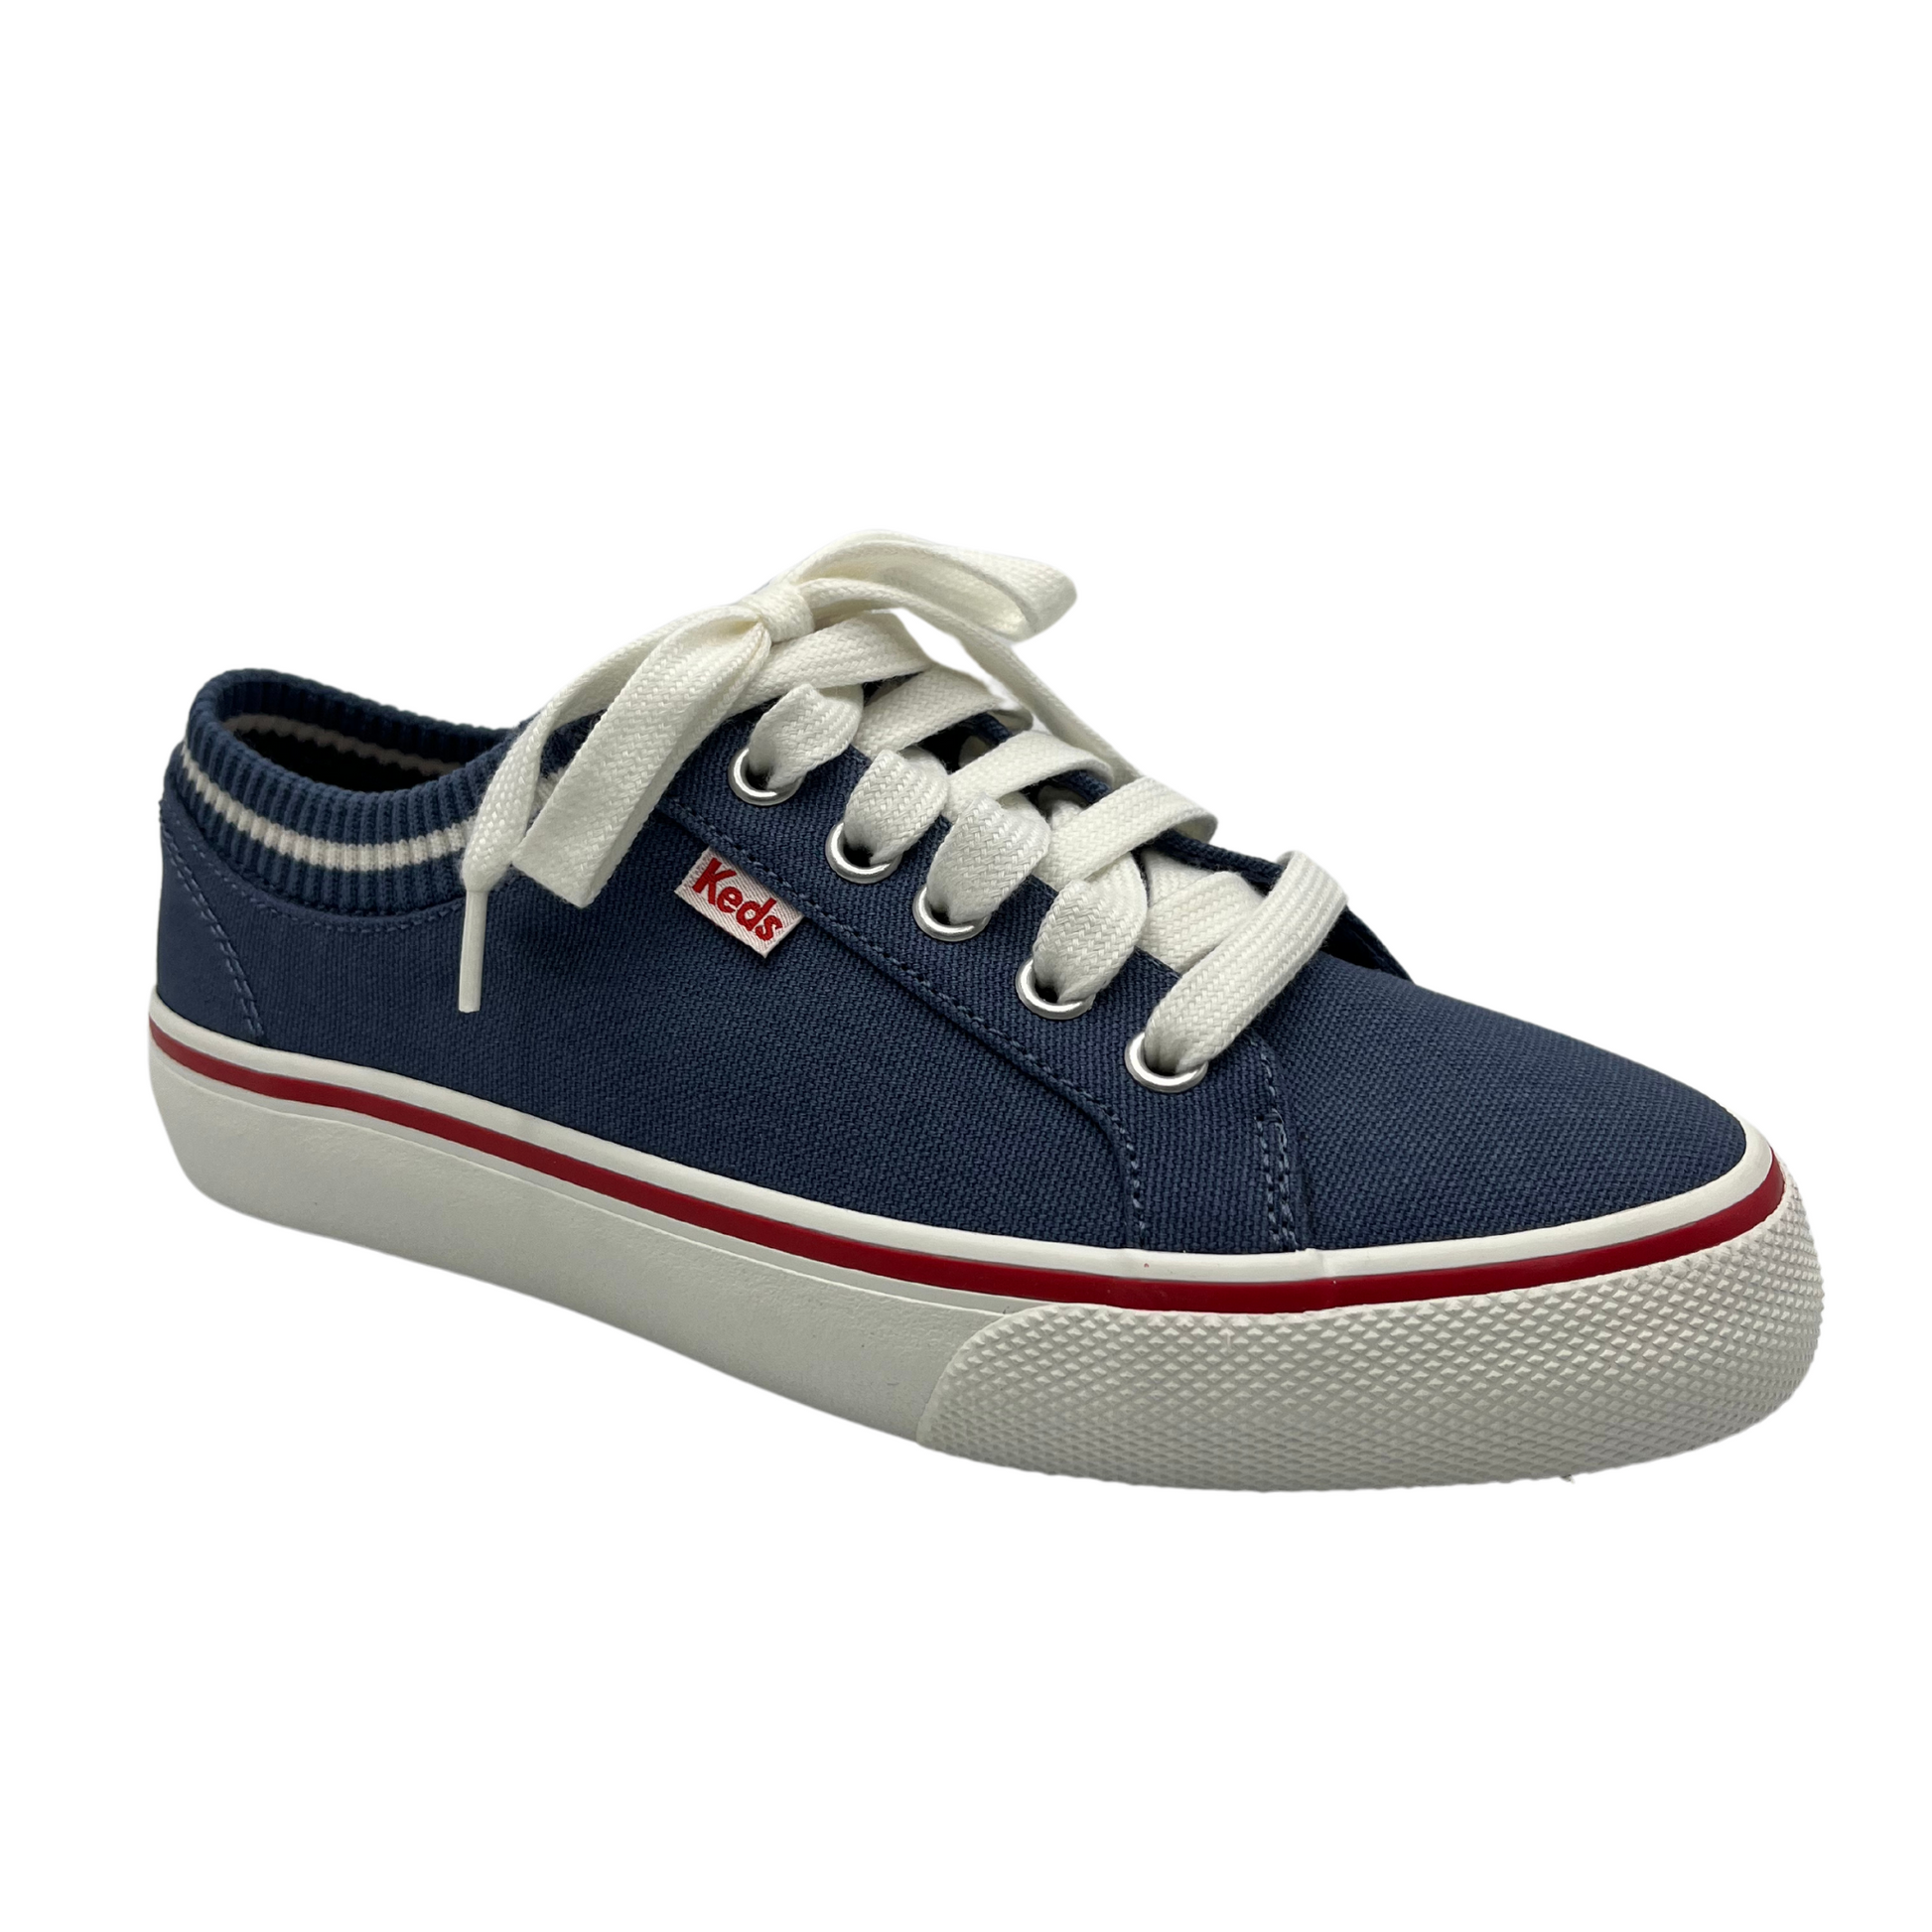 45 degree angled view of navy canvas shoes with sock opening, white laces and rubber outsole